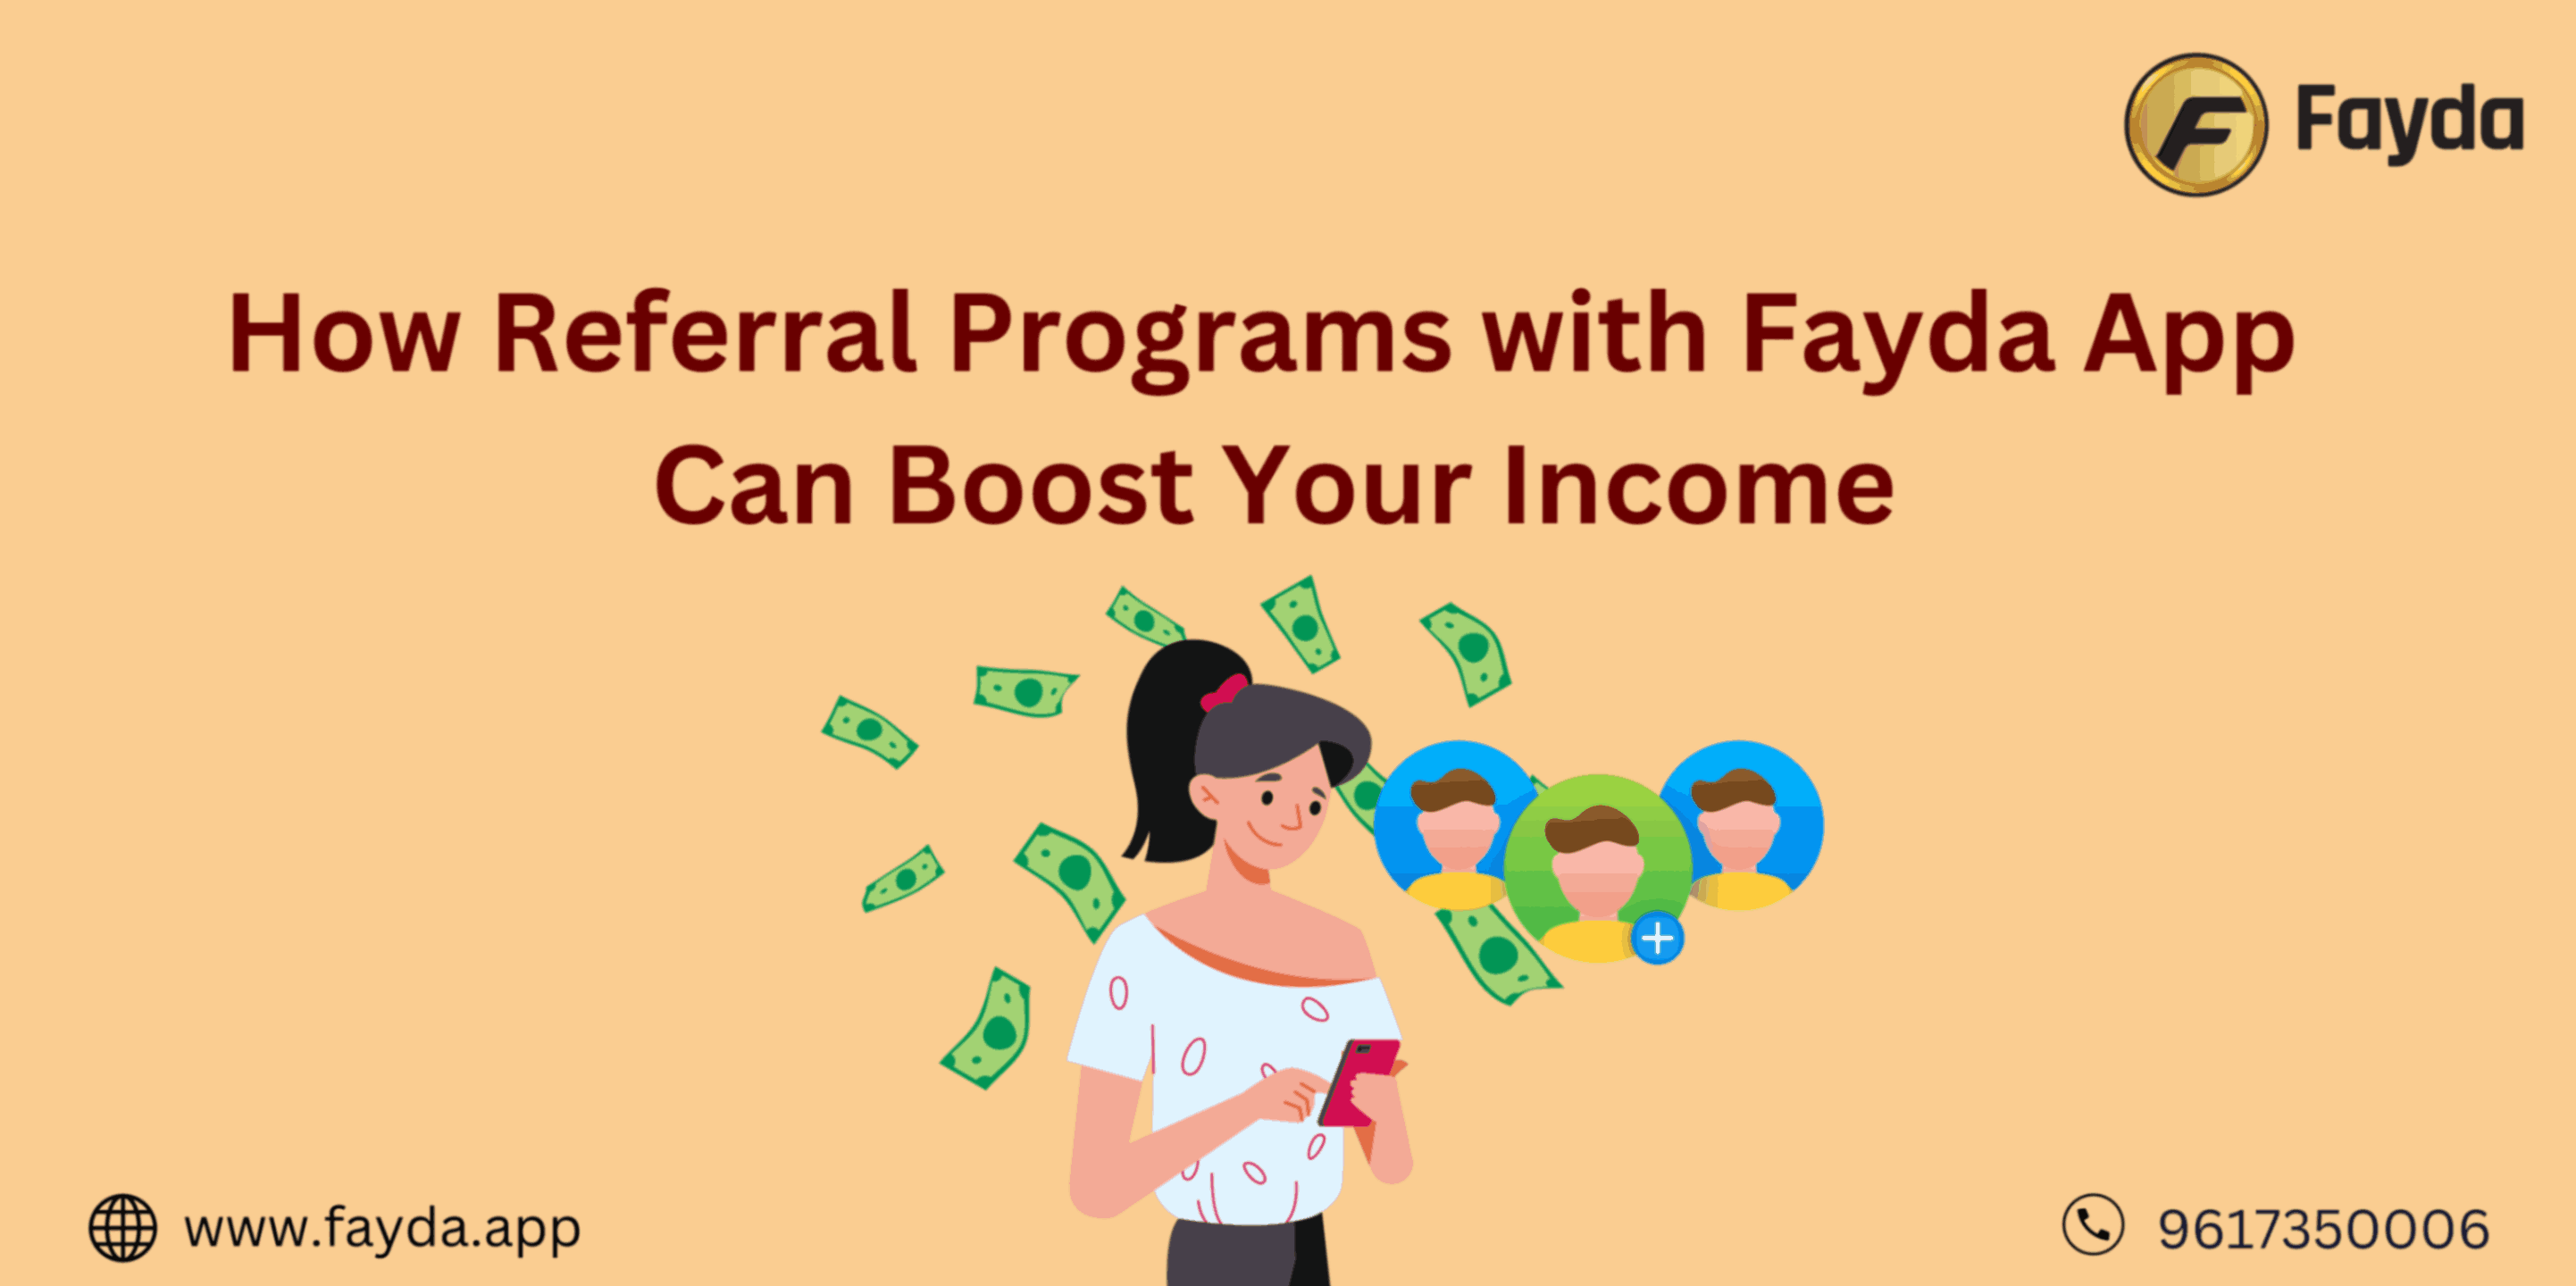 How Referral Programs with Fayda App Can Boost Your Income